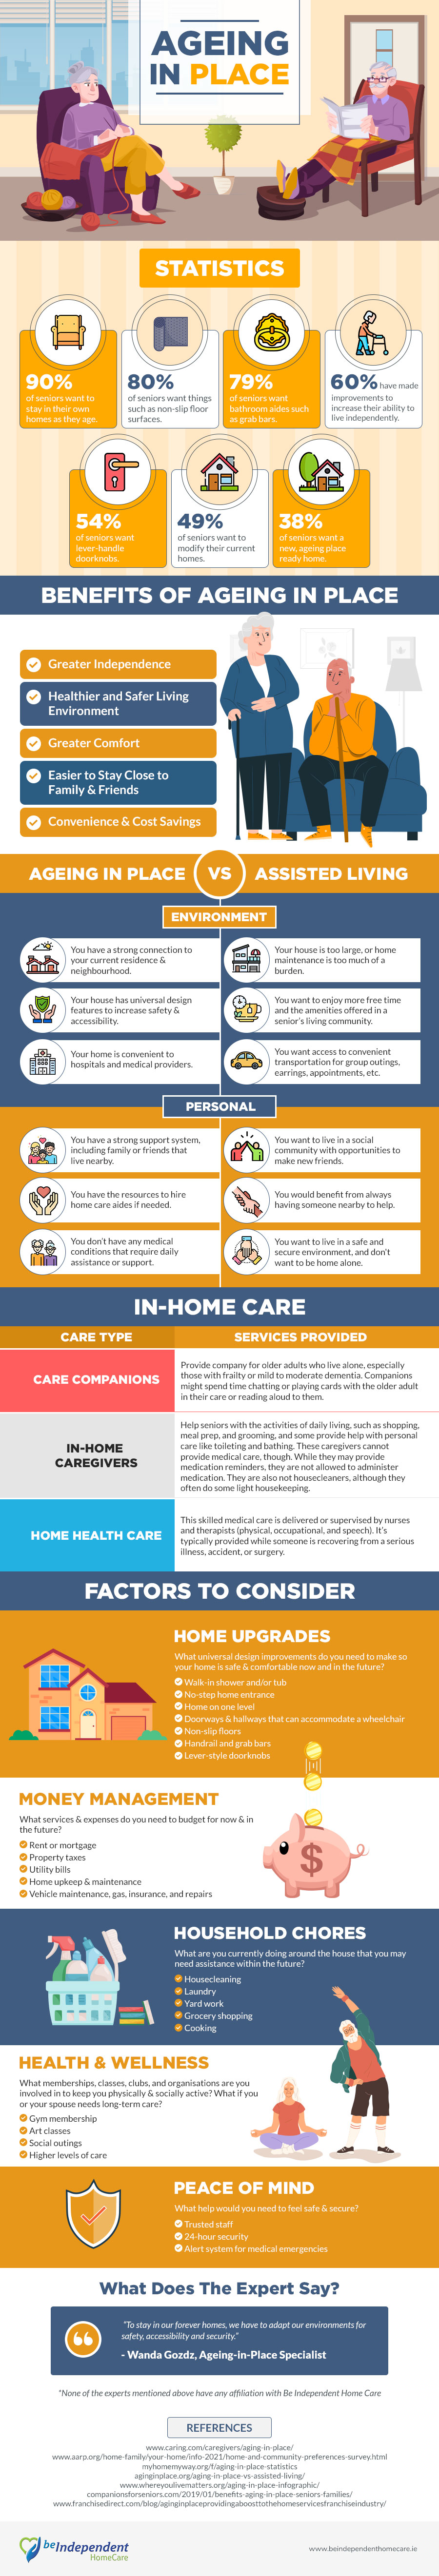 aging in place infographic for seniors